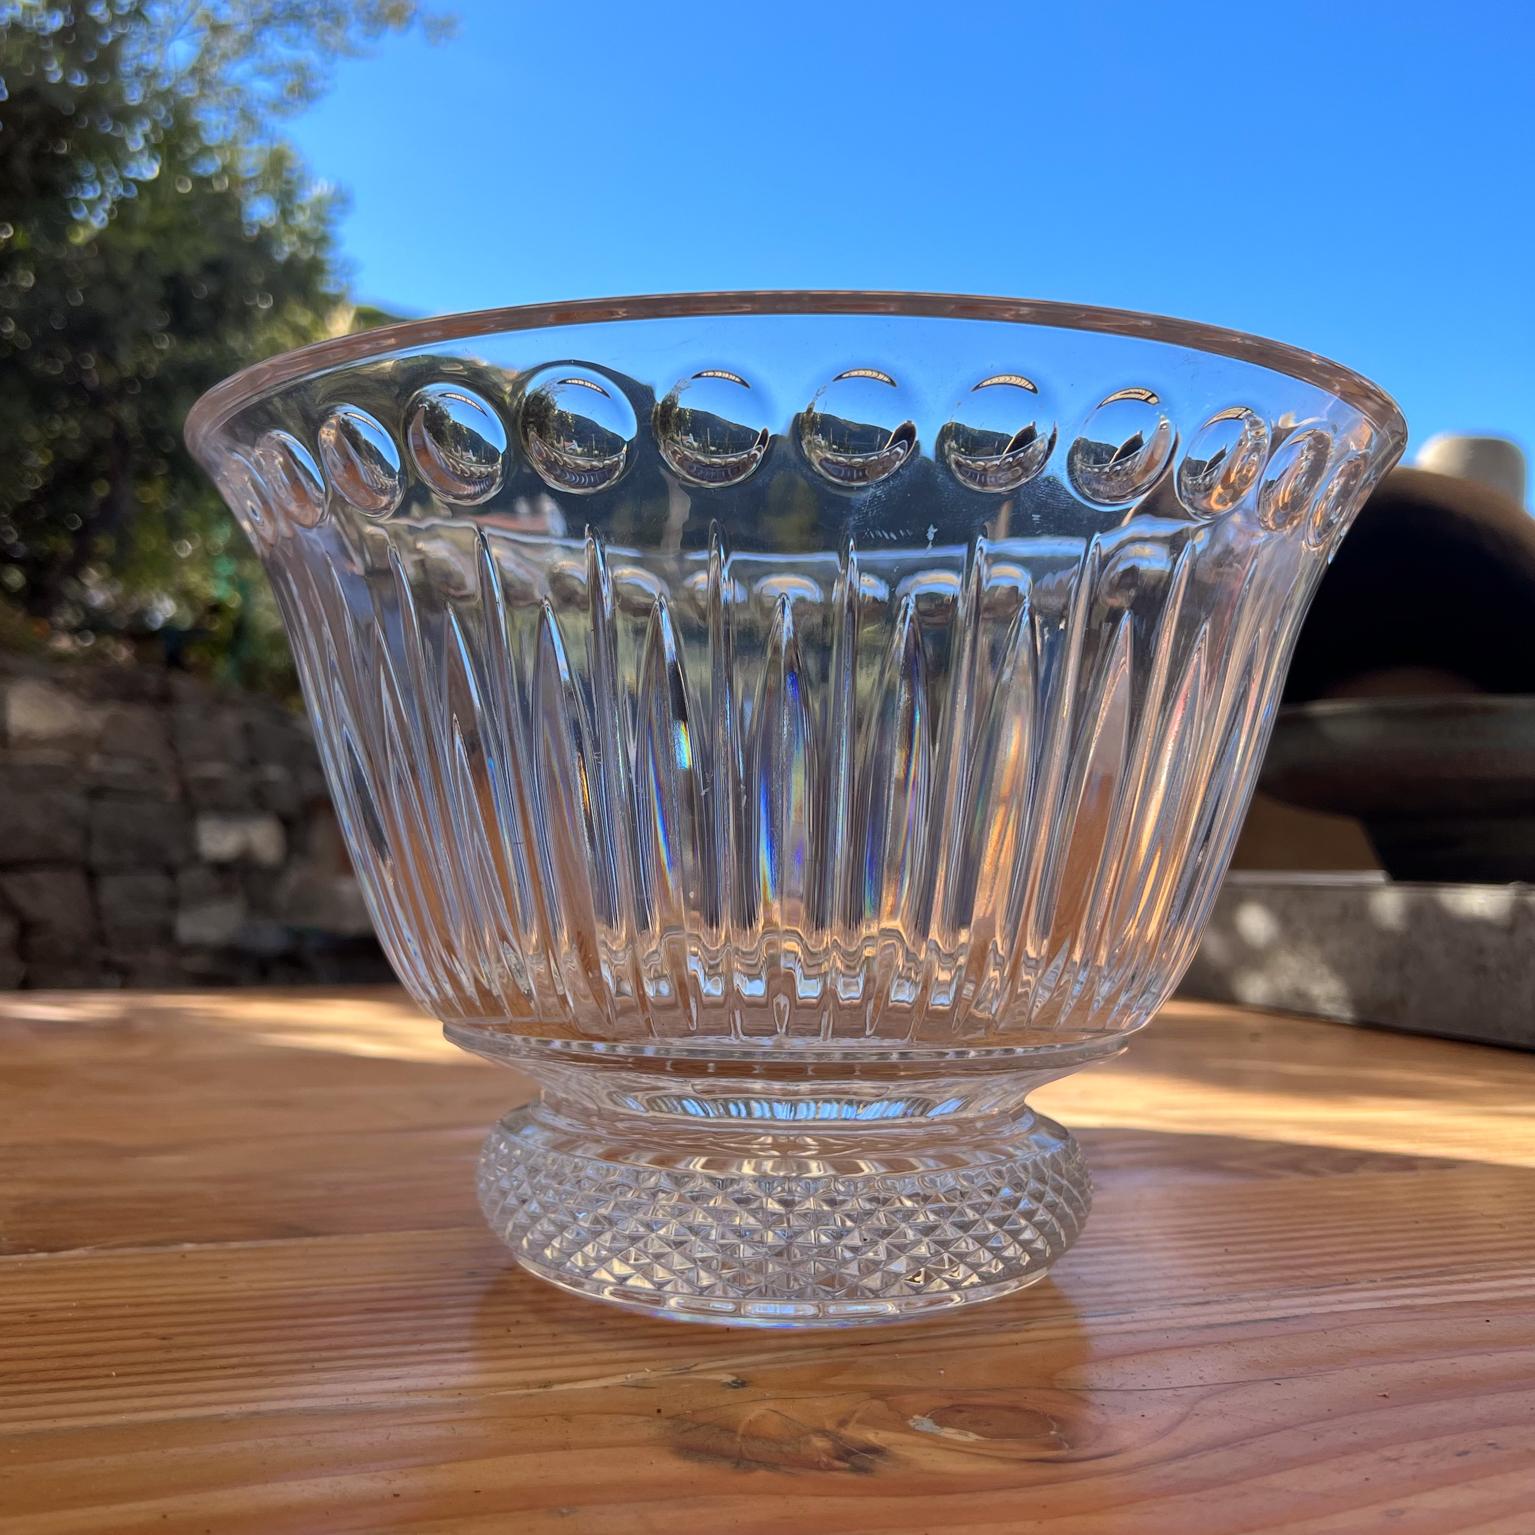 Sutton Place by Godinger
elegant crystal glass bowl
10.88 diameter x 7.38 H
Preowned original vintage condition.
Refer to images please.